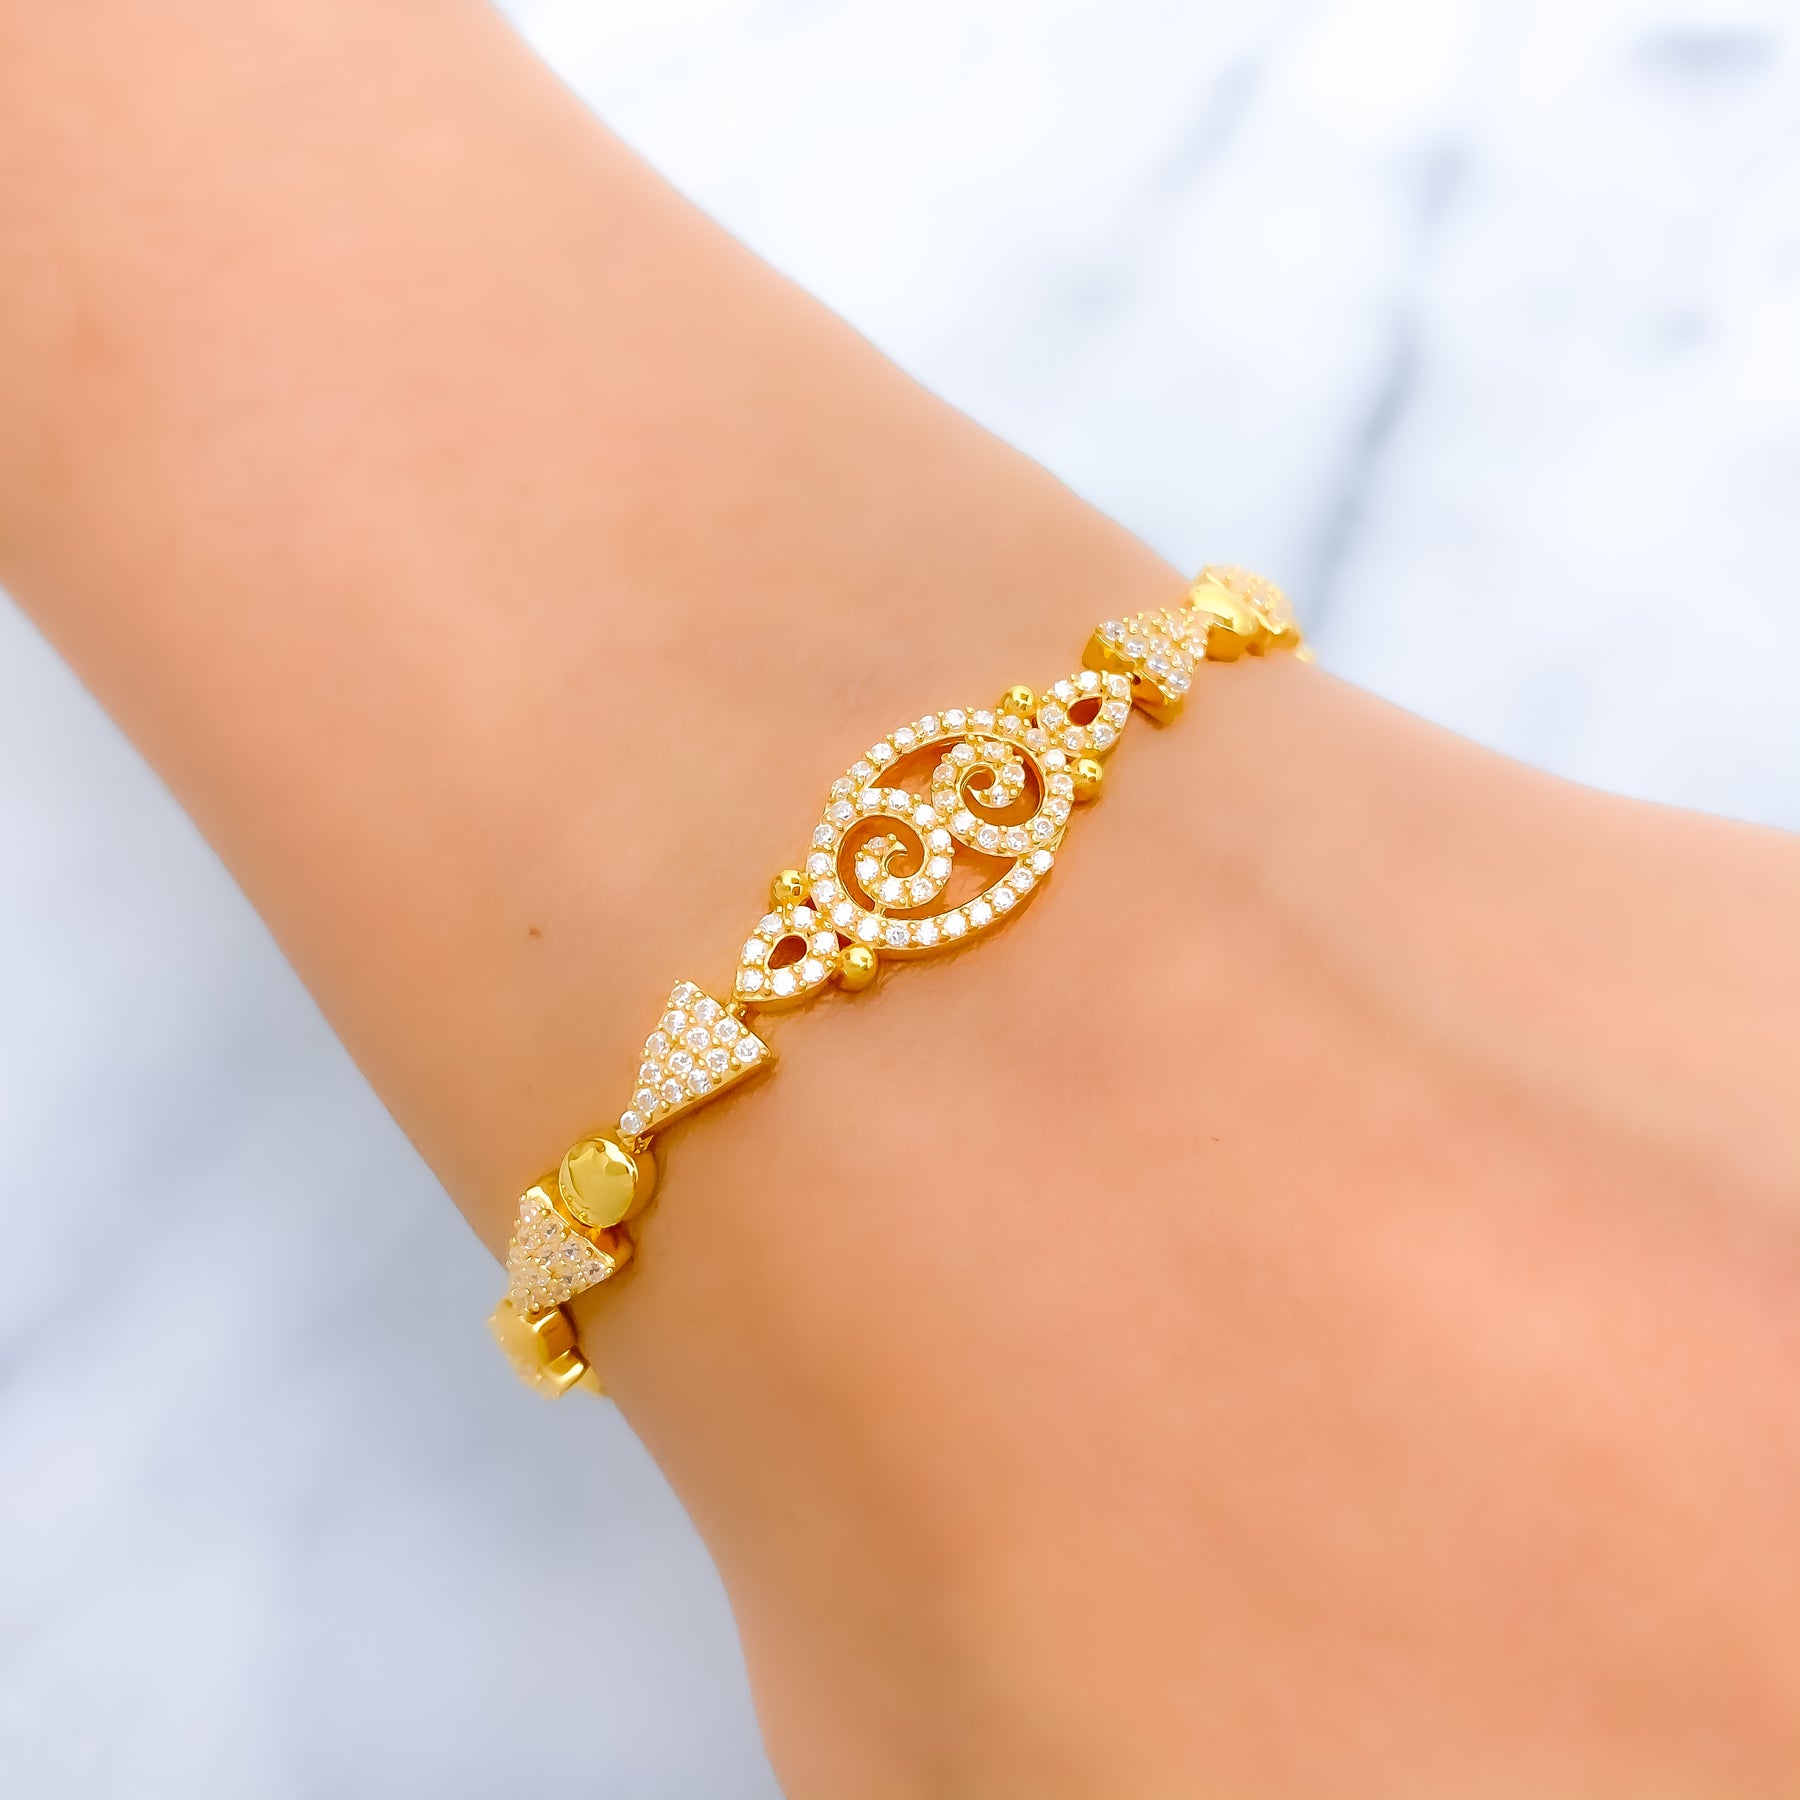 22 kt 4.20 GM Gold Bracelet | Indian Gold Jewelry | Shop Now